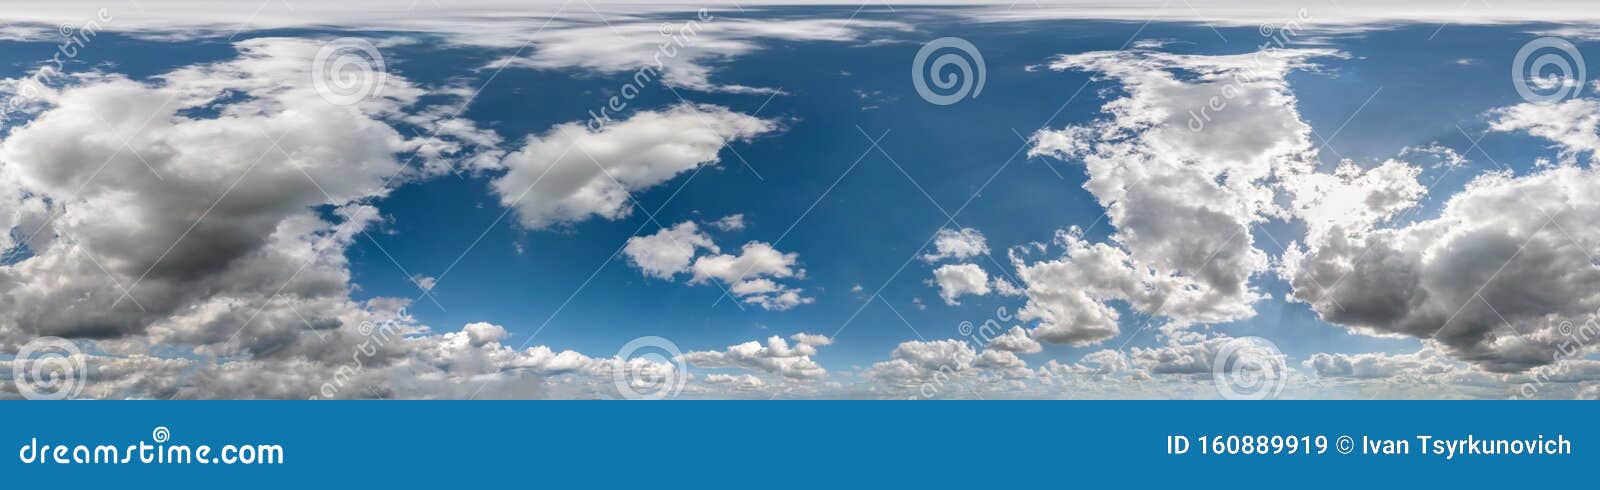 seamless cloudy blue sky hdri panorama 360 degrees angle view with zenith and beautiful clouds for use in 3d graphics as sky dome